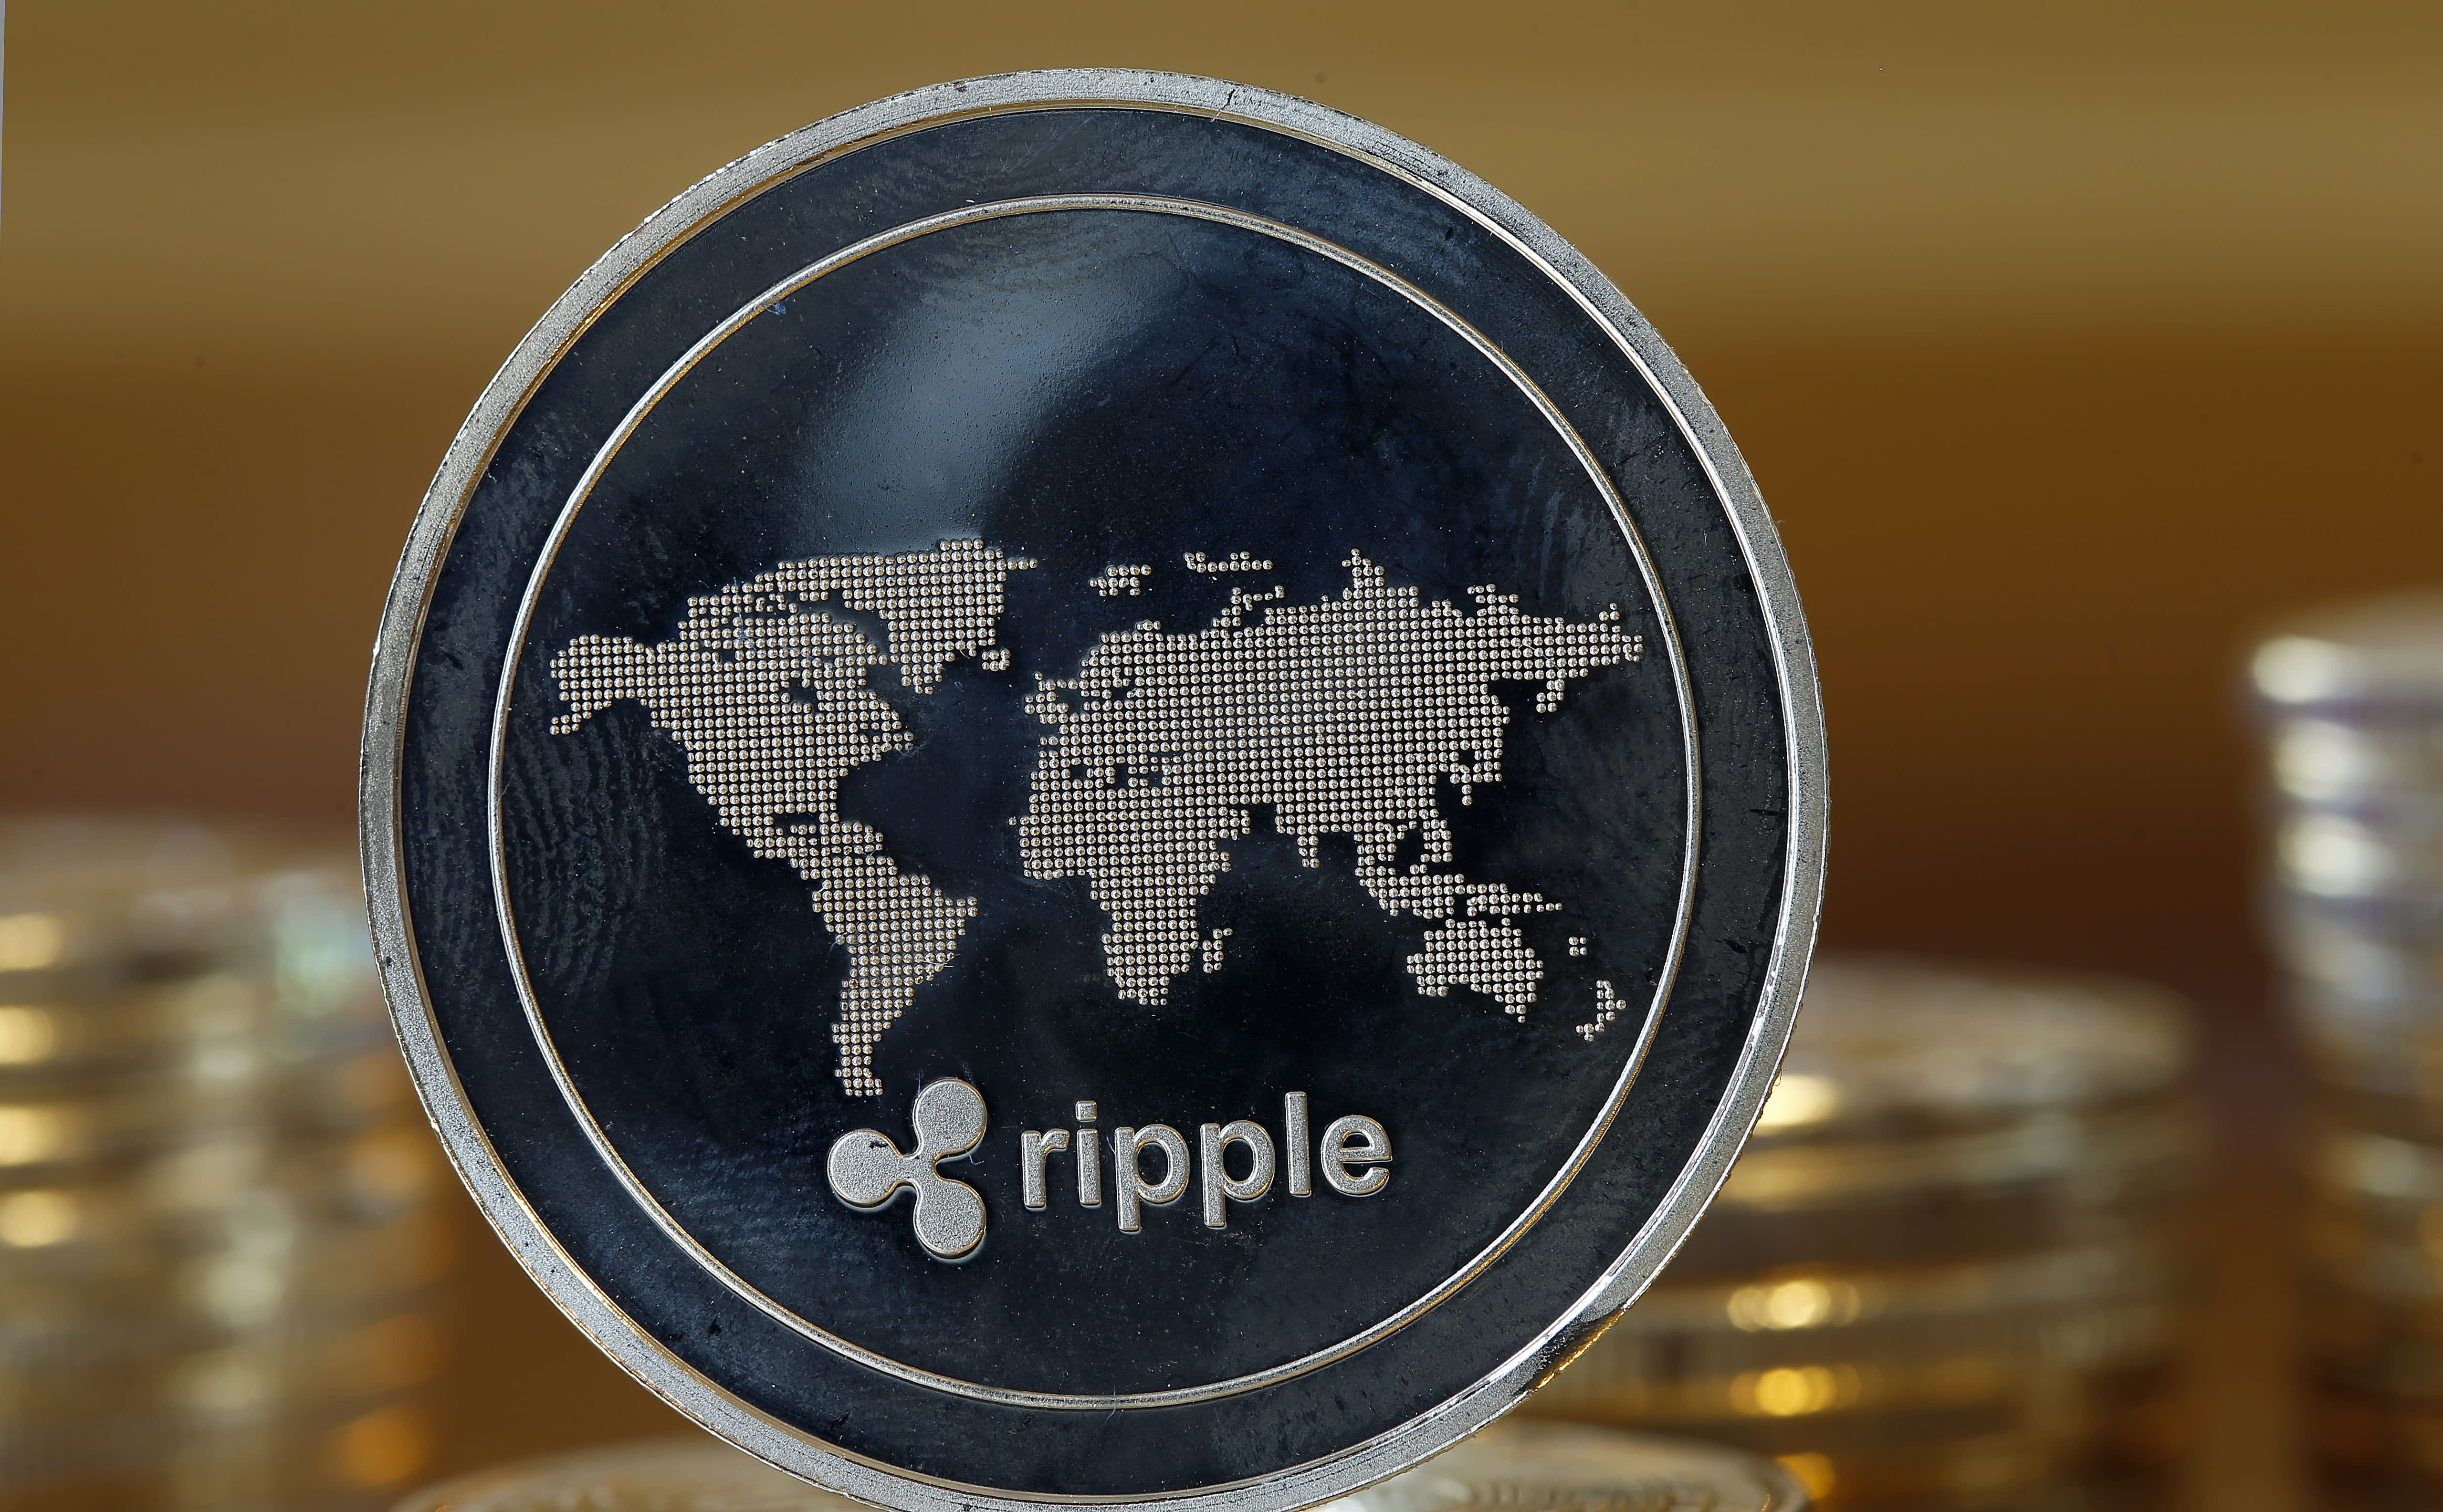 Ripple hopes the judge’s decision in the SEC case will lead to US banks using XRP